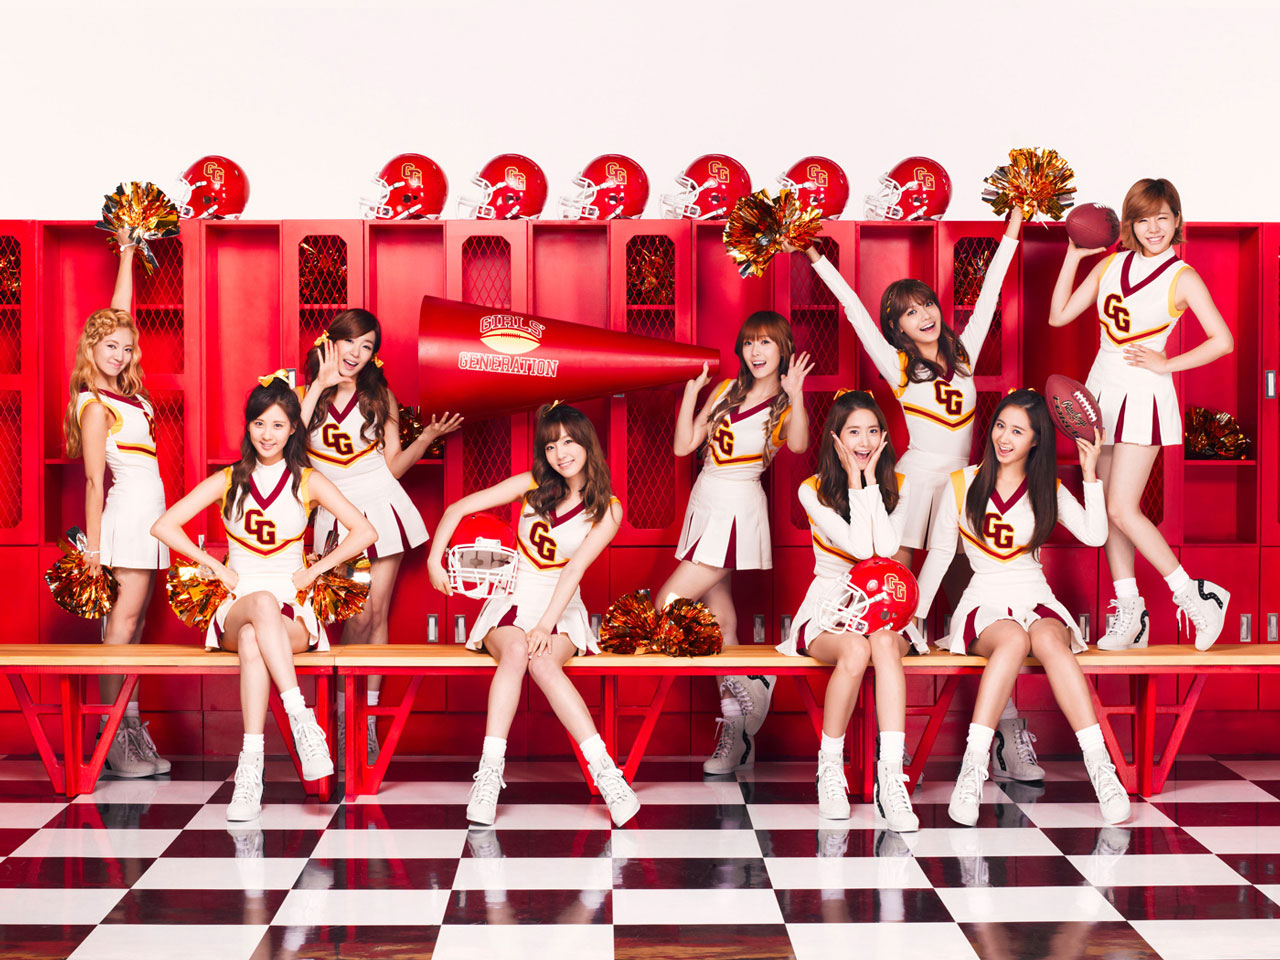 Snsd Japanese Oh concept image